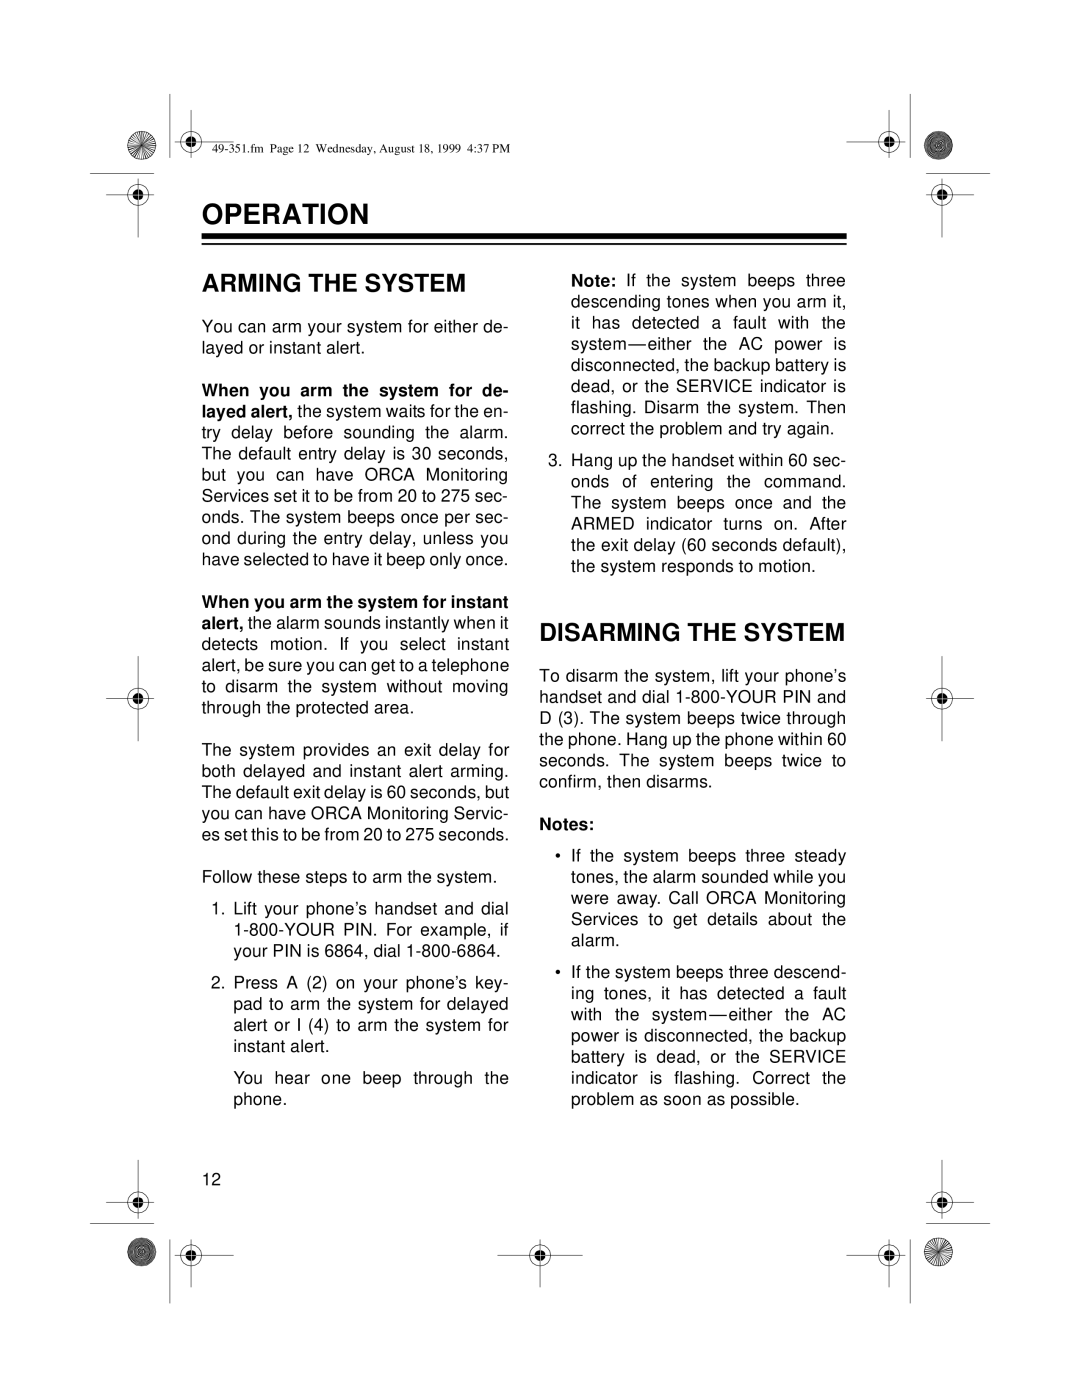 Radio Shack 49-351 owner manual Operation, Arming The System, Disarming The System 